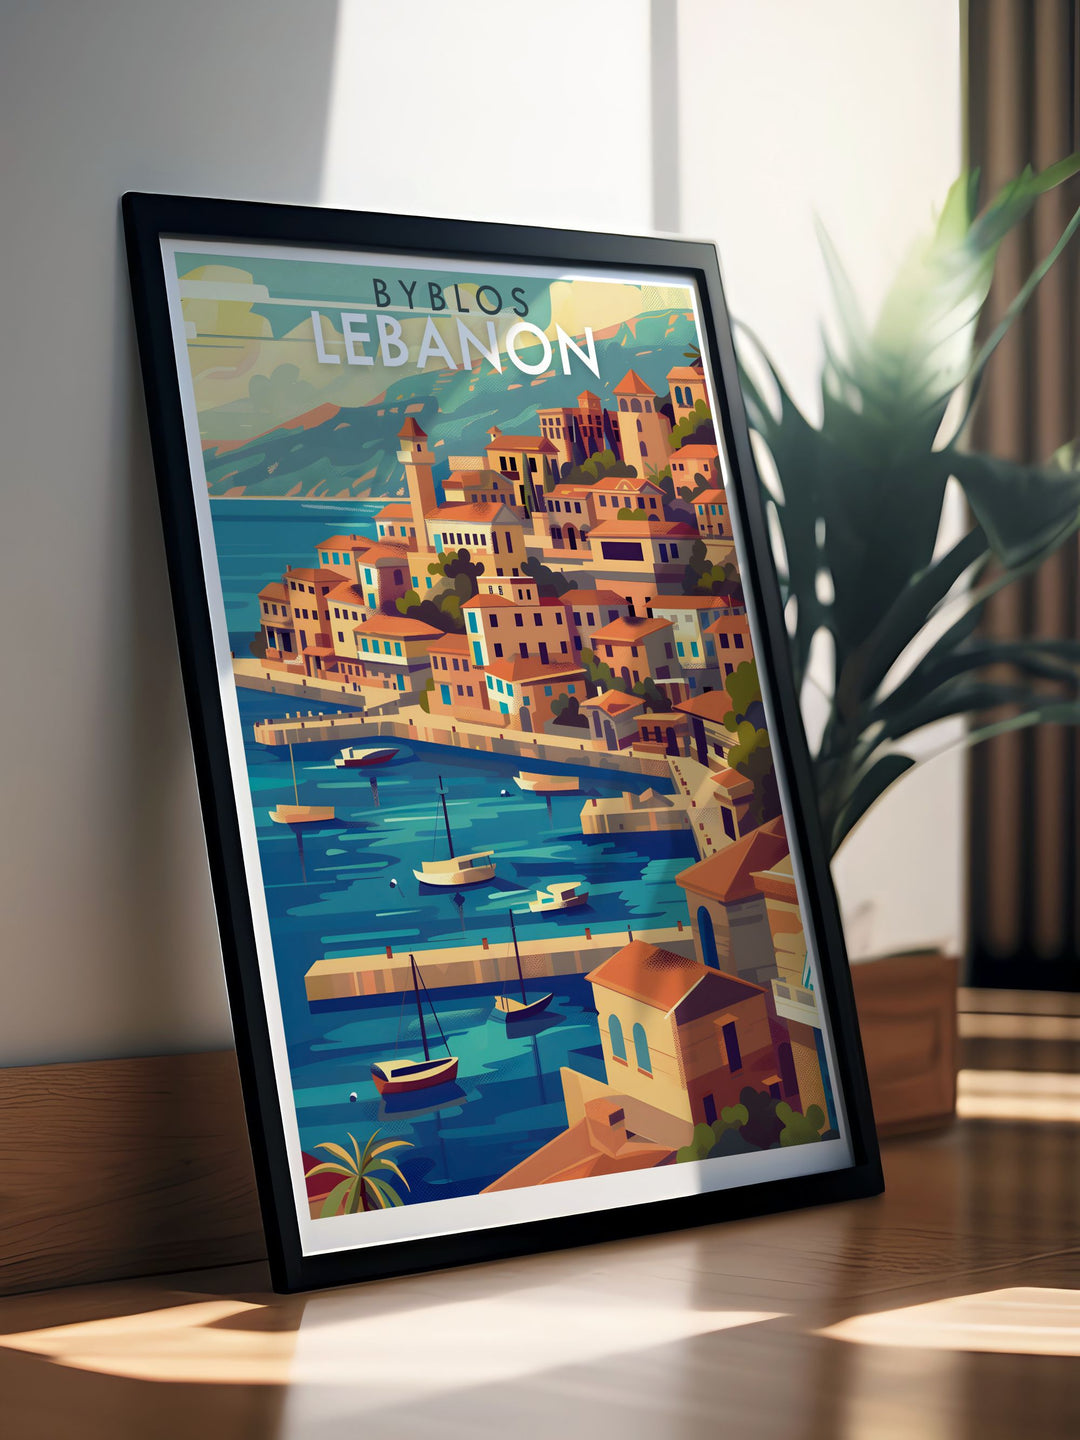 Beirut Wall Art showcasing the essence of Lebanons bustling markets and serene vistas paired with Byblos photography bringing a touch of history and culture to your home decor